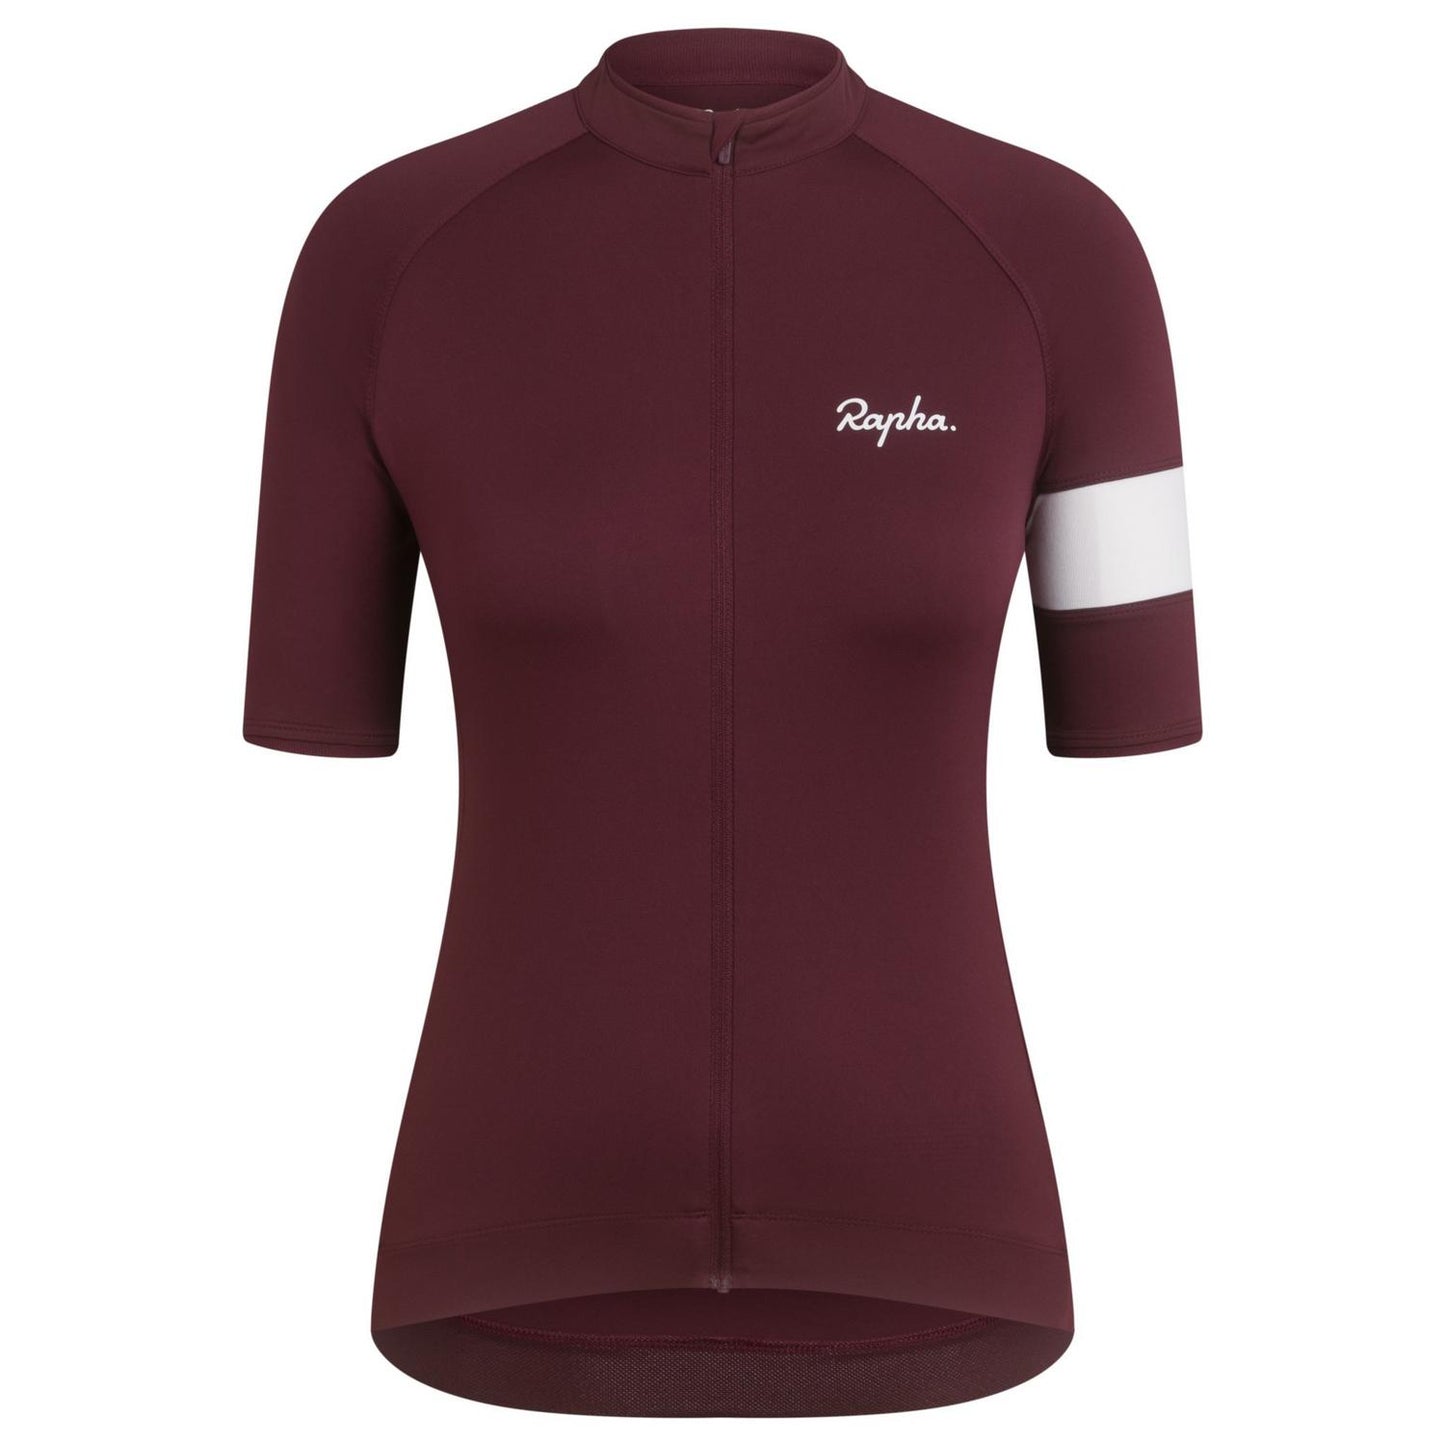 RAPHA Core Dones Maillot de Ciclisme - WWA Whine/White